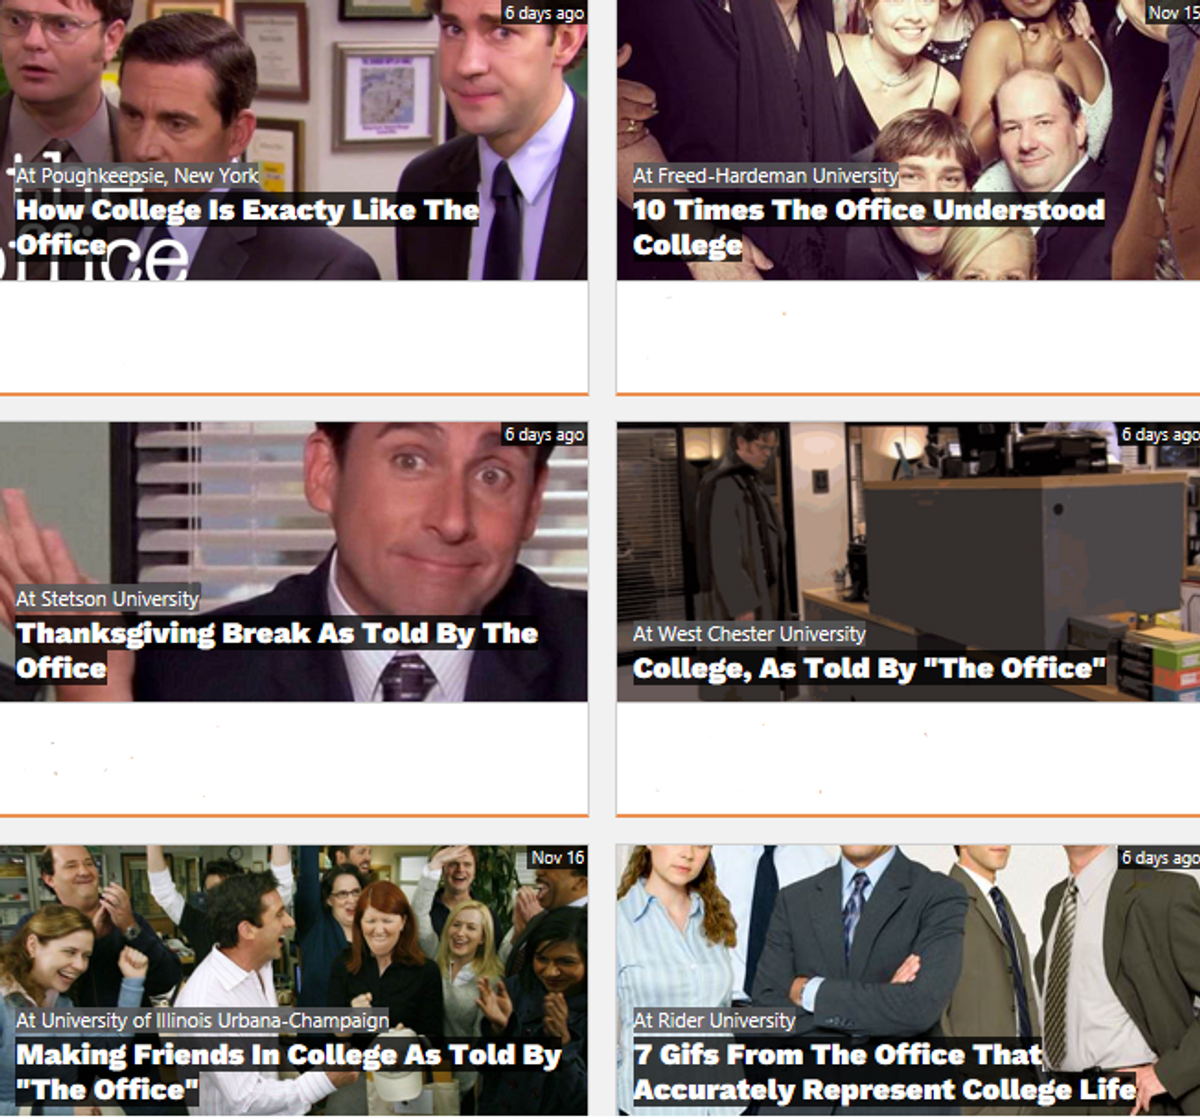 10 Things "The Office" Goes Through As Told By College Students